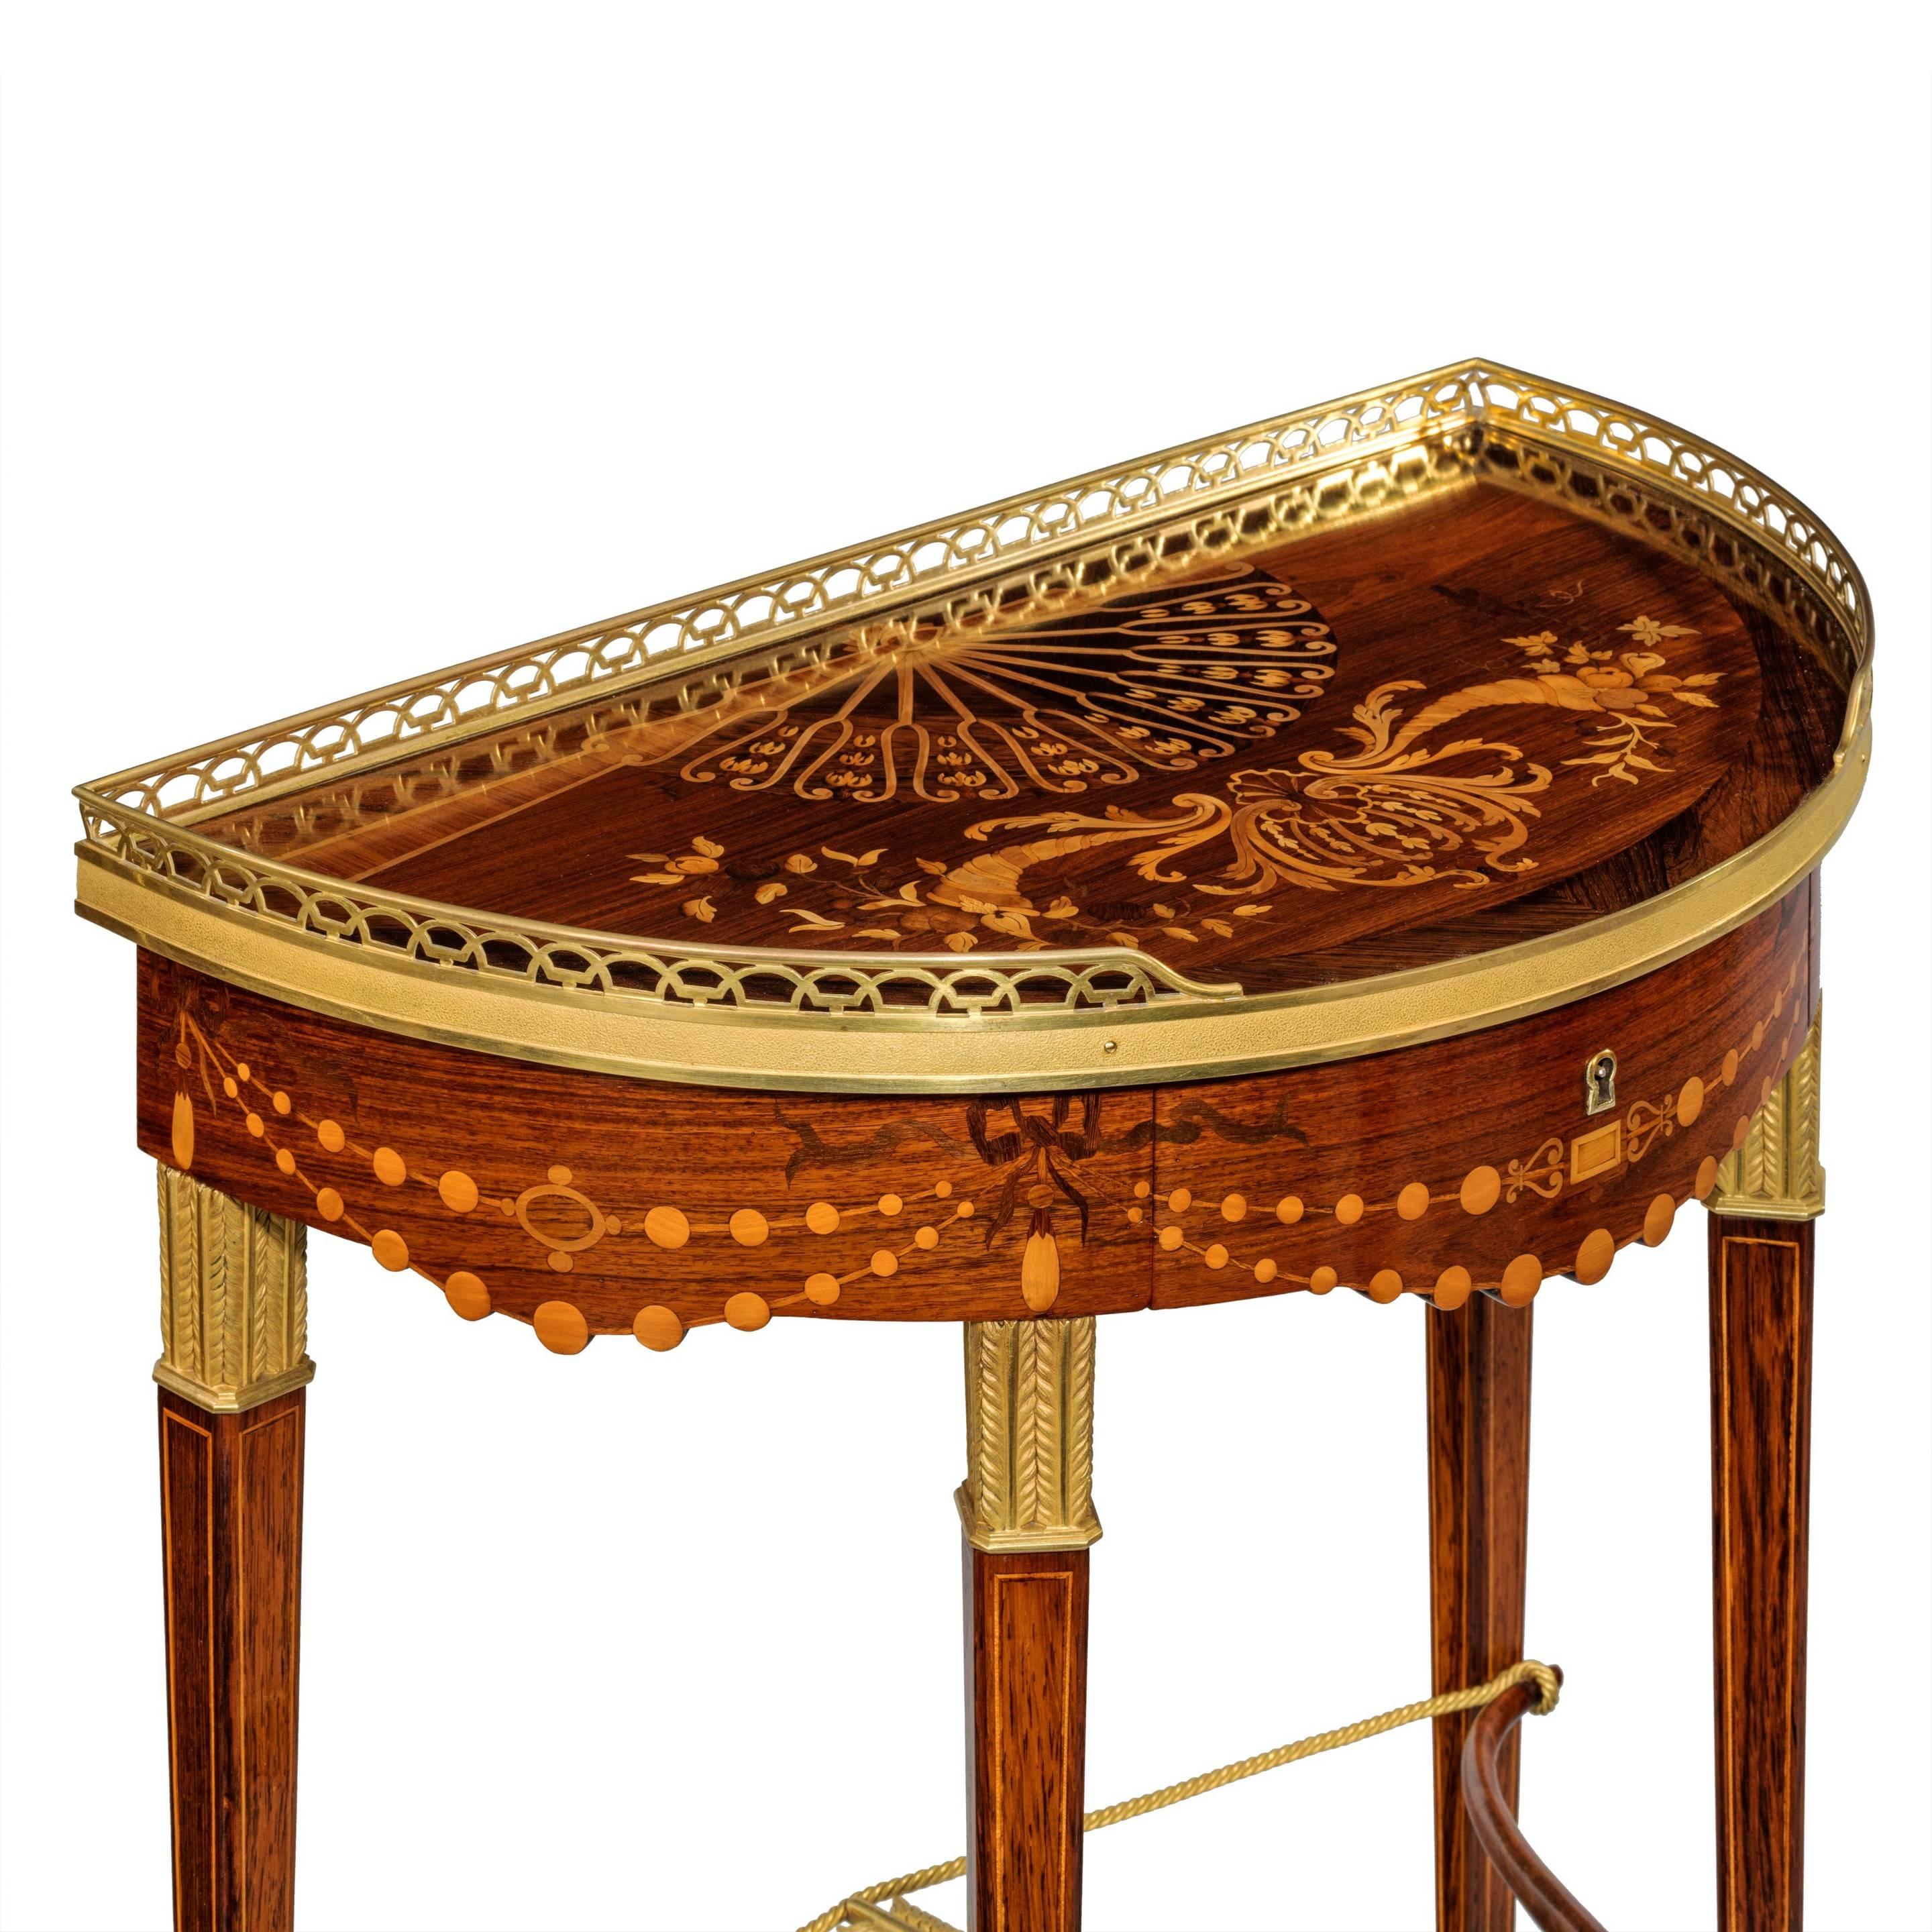 A companion pair of demilune bow and arrow tables by Alix, each freestanding table with an ormolu gallery and disguised frieze drawer, all raised on four stylized quivers joined by a drawn bow and ormolu arrow, inlaid throughout with a variety of